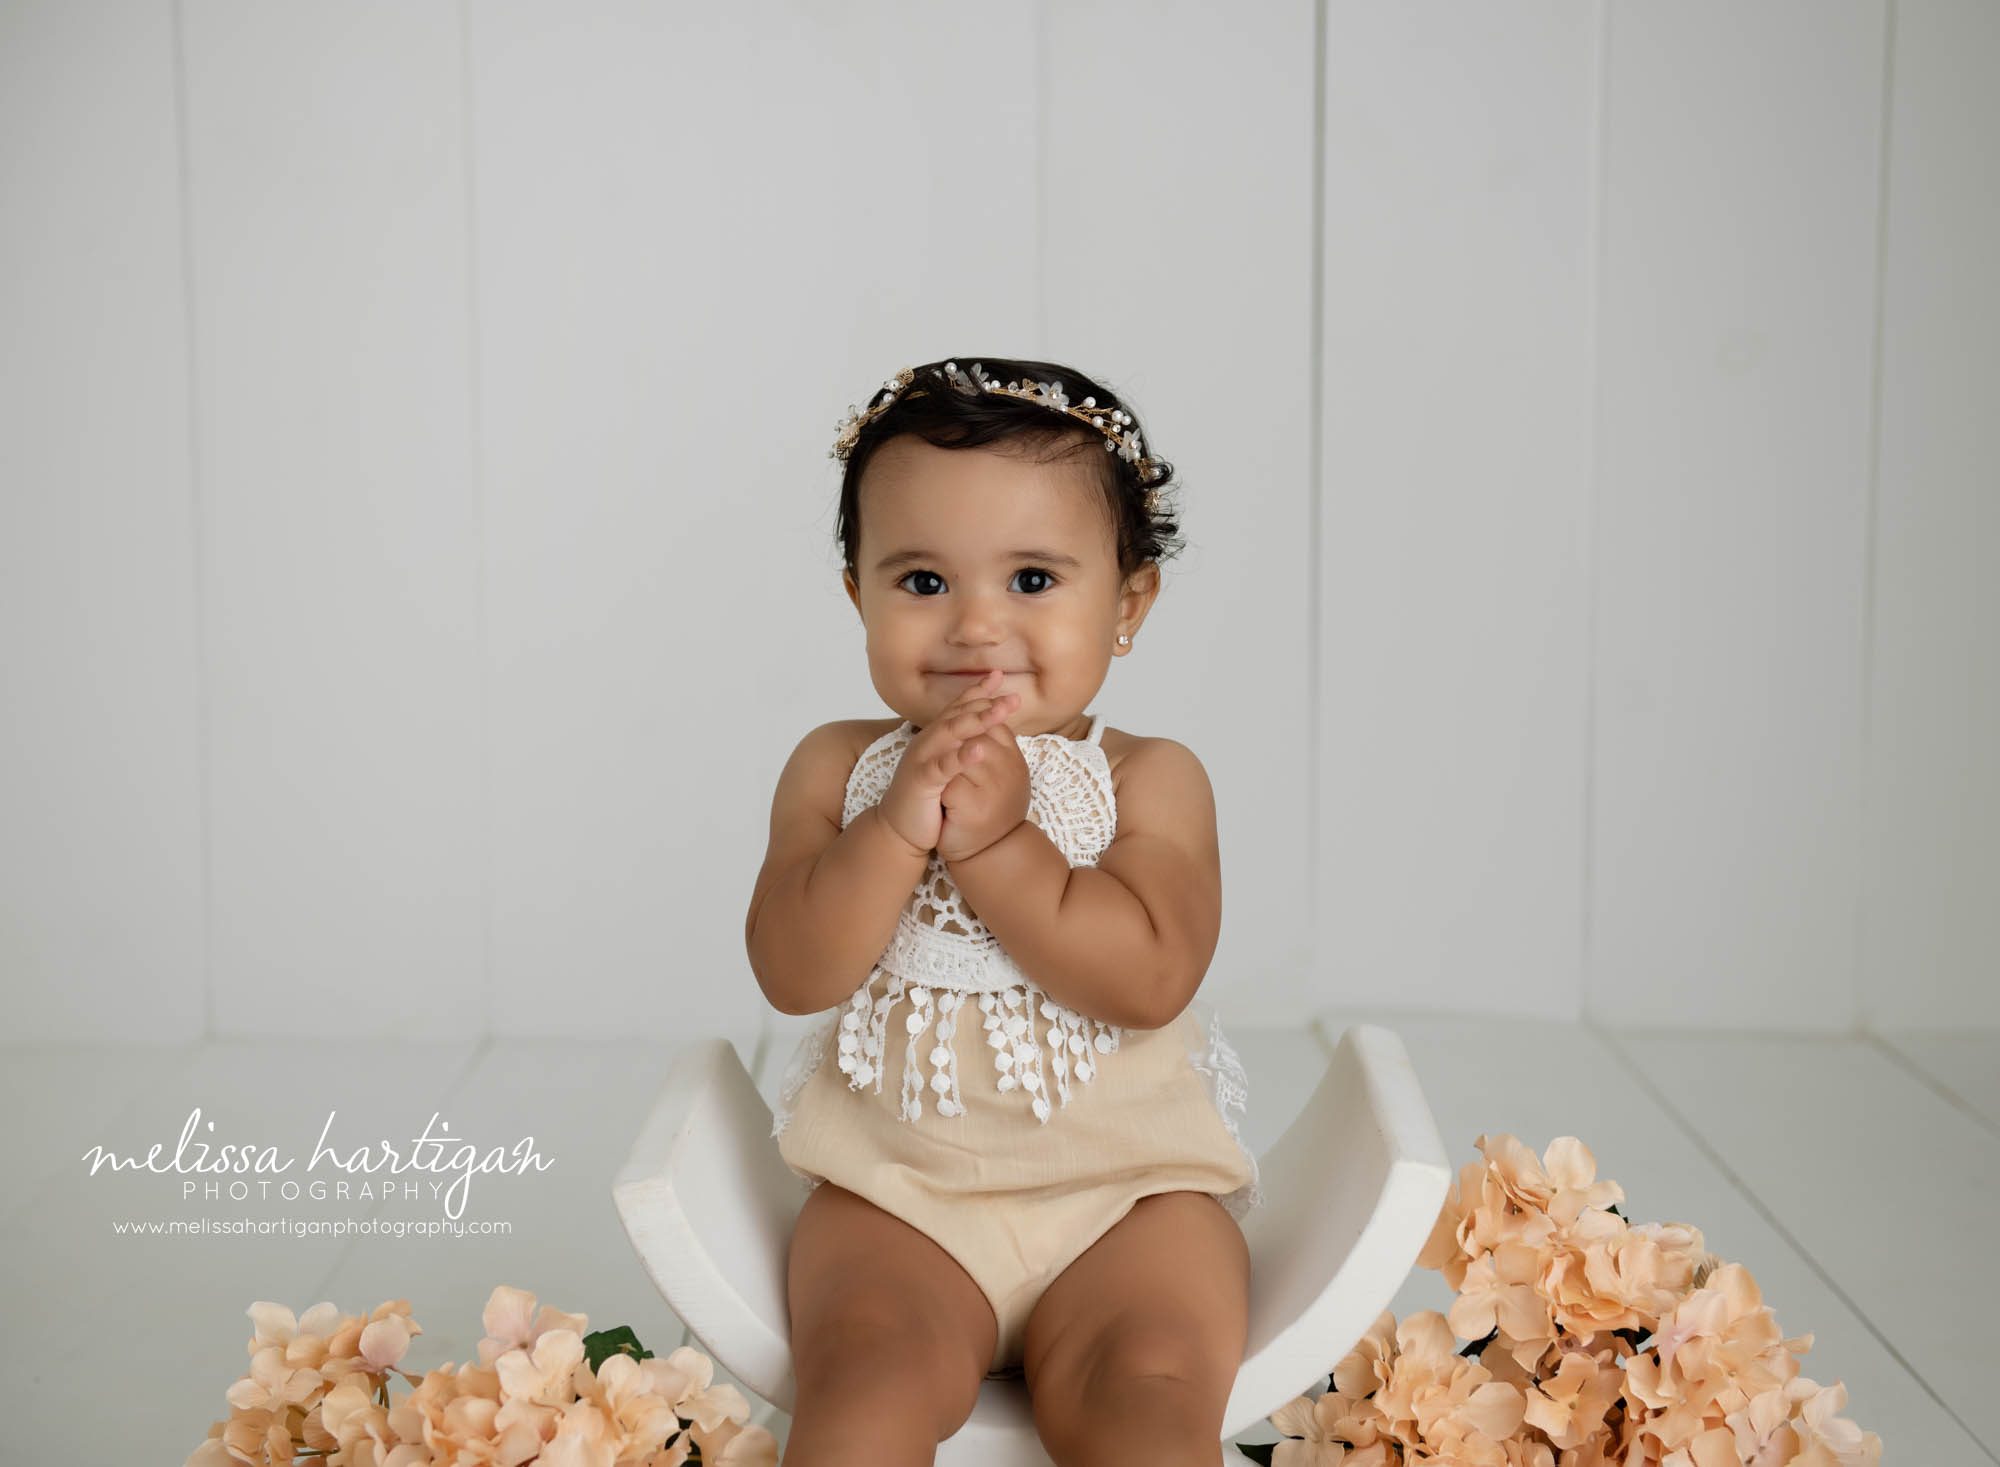 Baby girl wearing white lace outfit CT baby milestone photography session